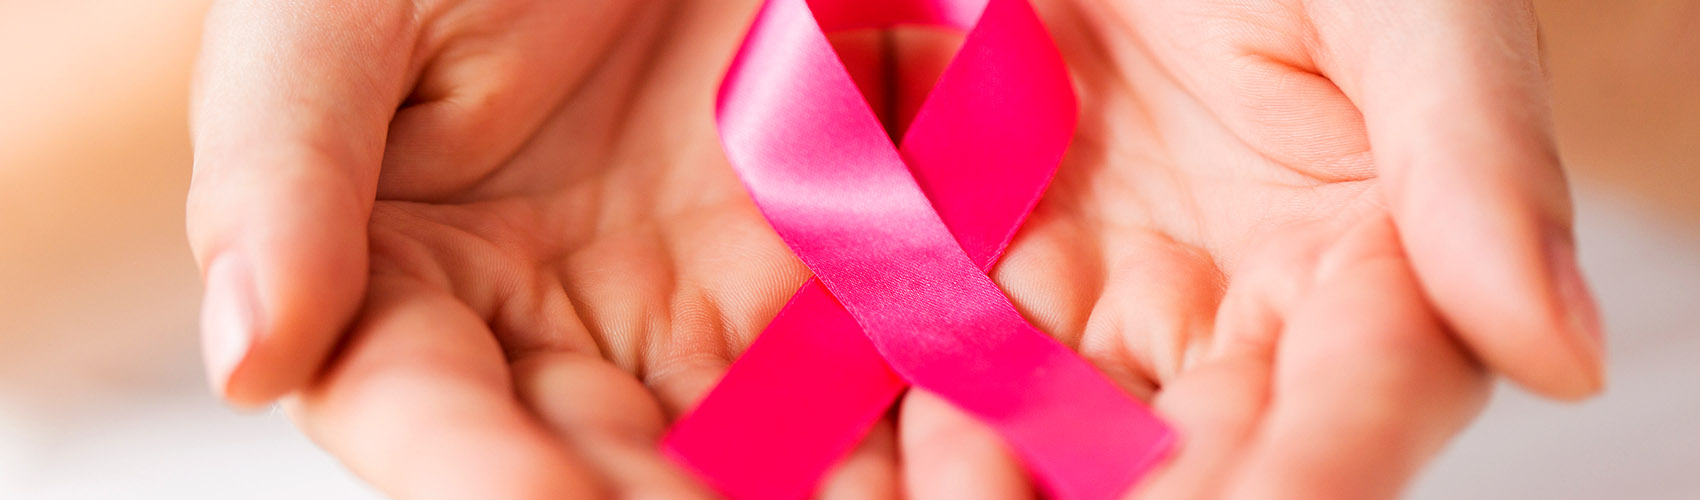 5 Myths About Breast Cancer